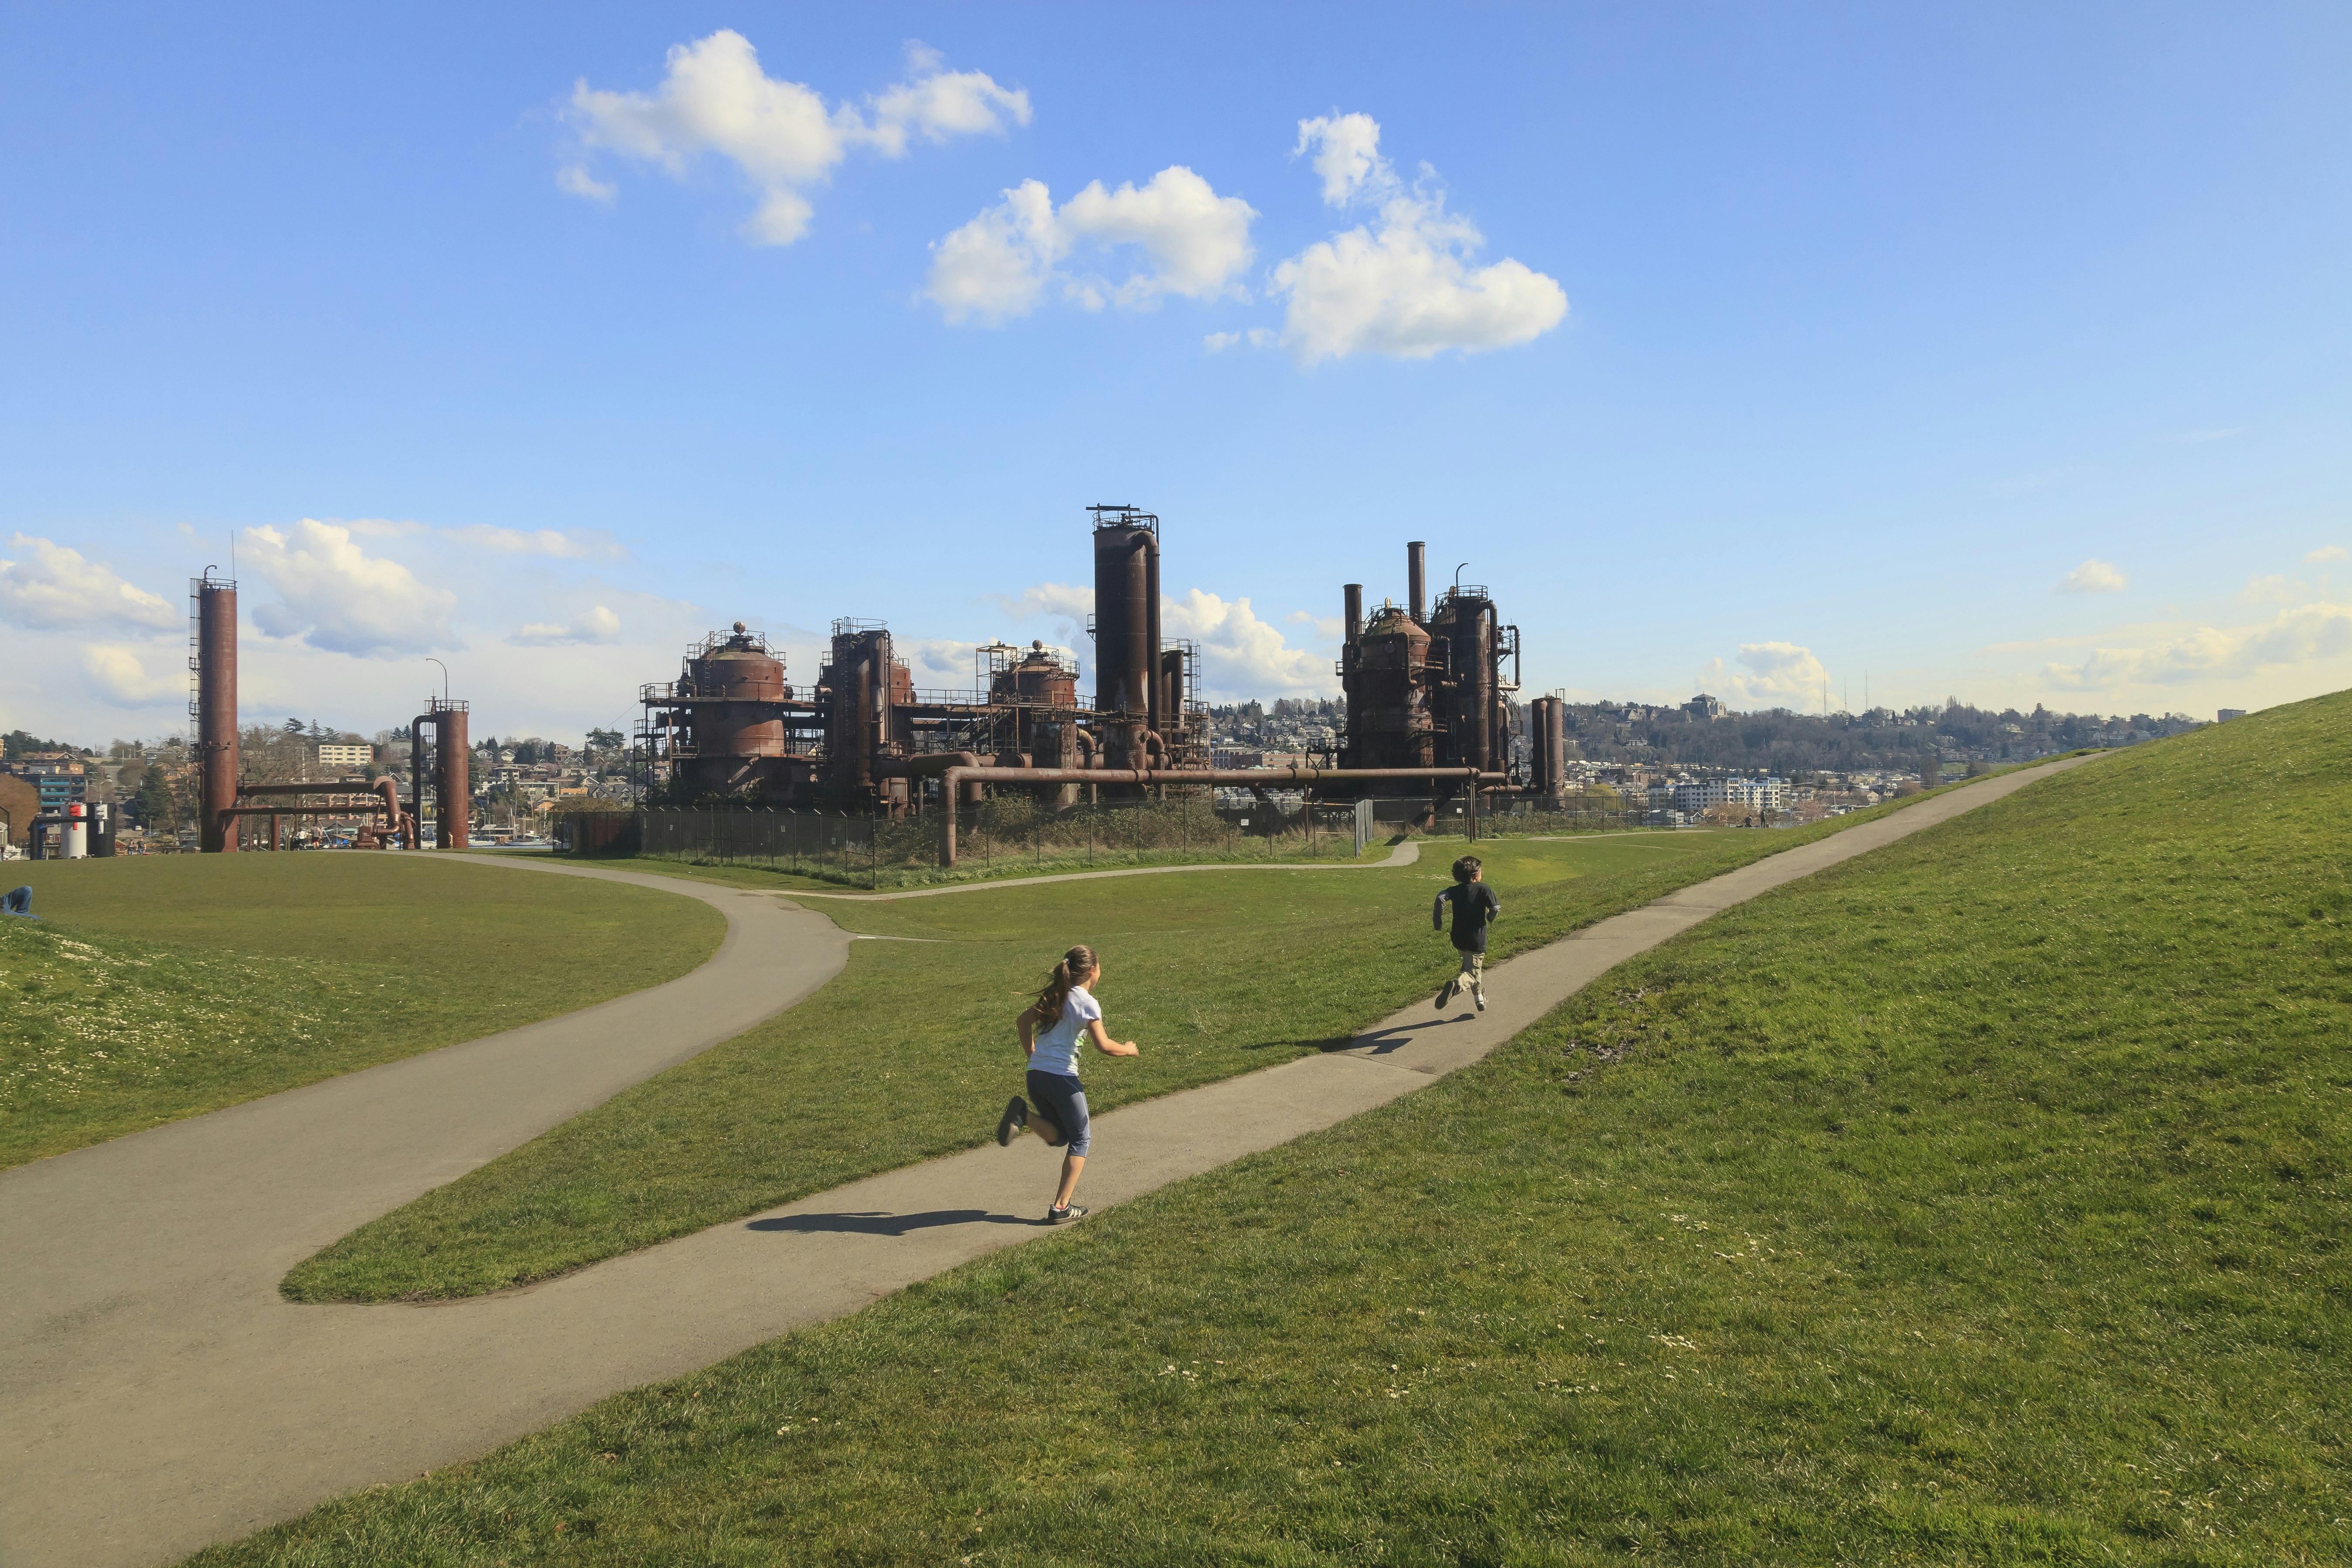 Two young children run along a path in a park on a sunny day with the rusty hulk of old gas works in front of them